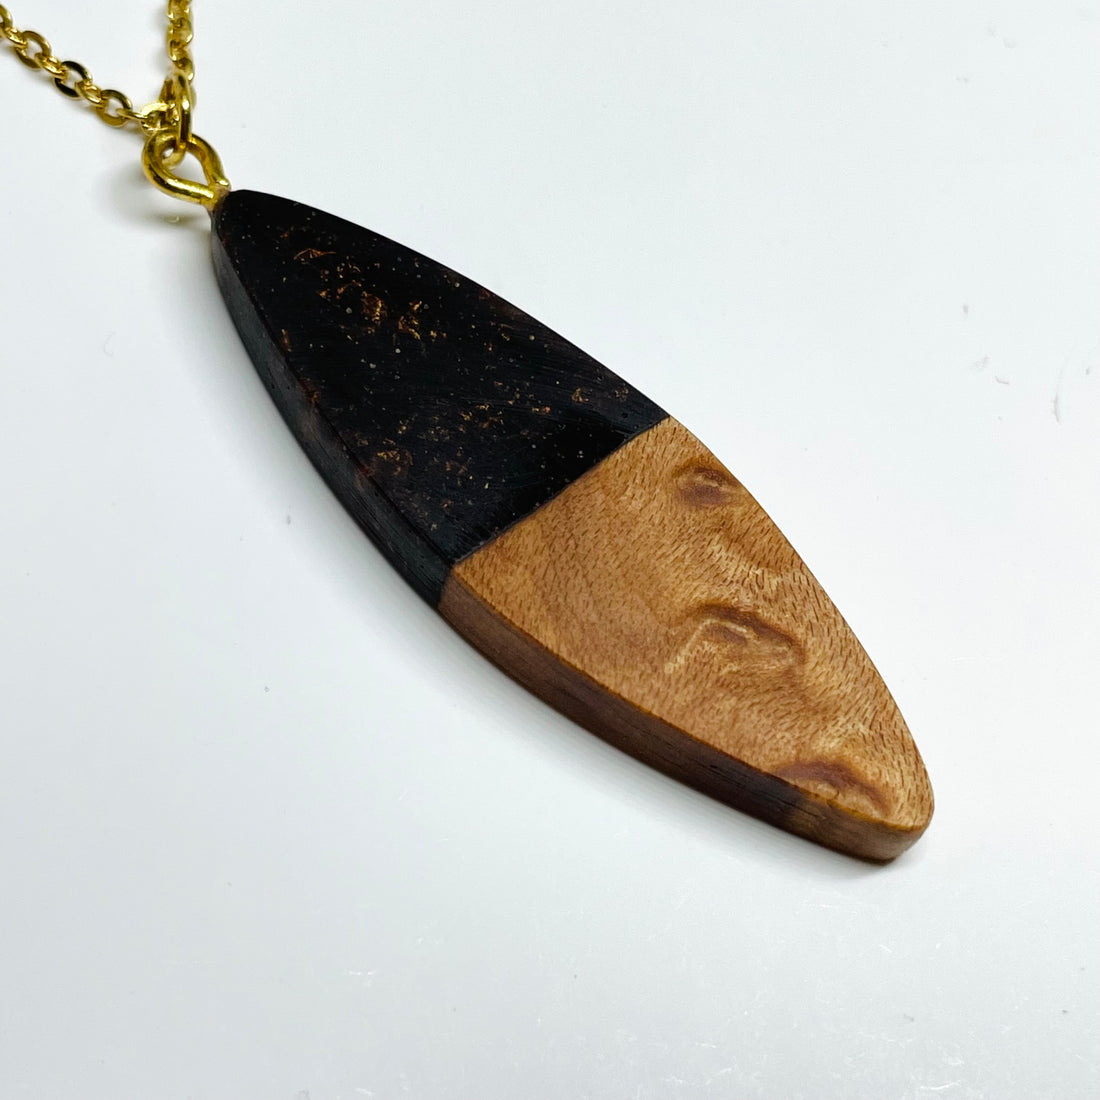 handmade jewelry, Minnesota local wood and resin artist. handmade birdseye maple wood and resin pendant necklace, 15" stainless steel chain, Bronze brown resin